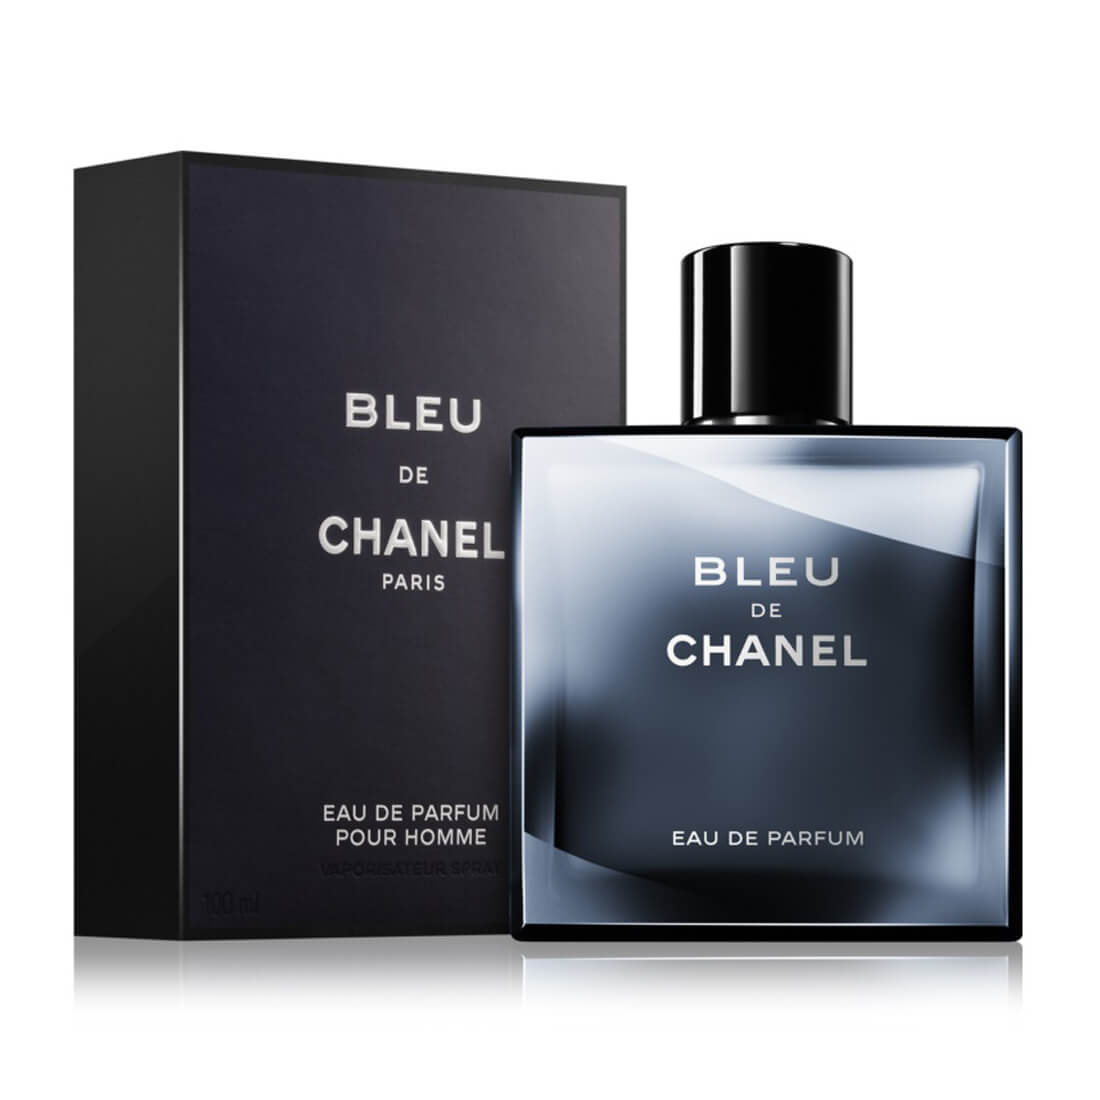 Chanel's N°5 Dupe Perfume: Floral Aldehydes - Dossier Perfumes